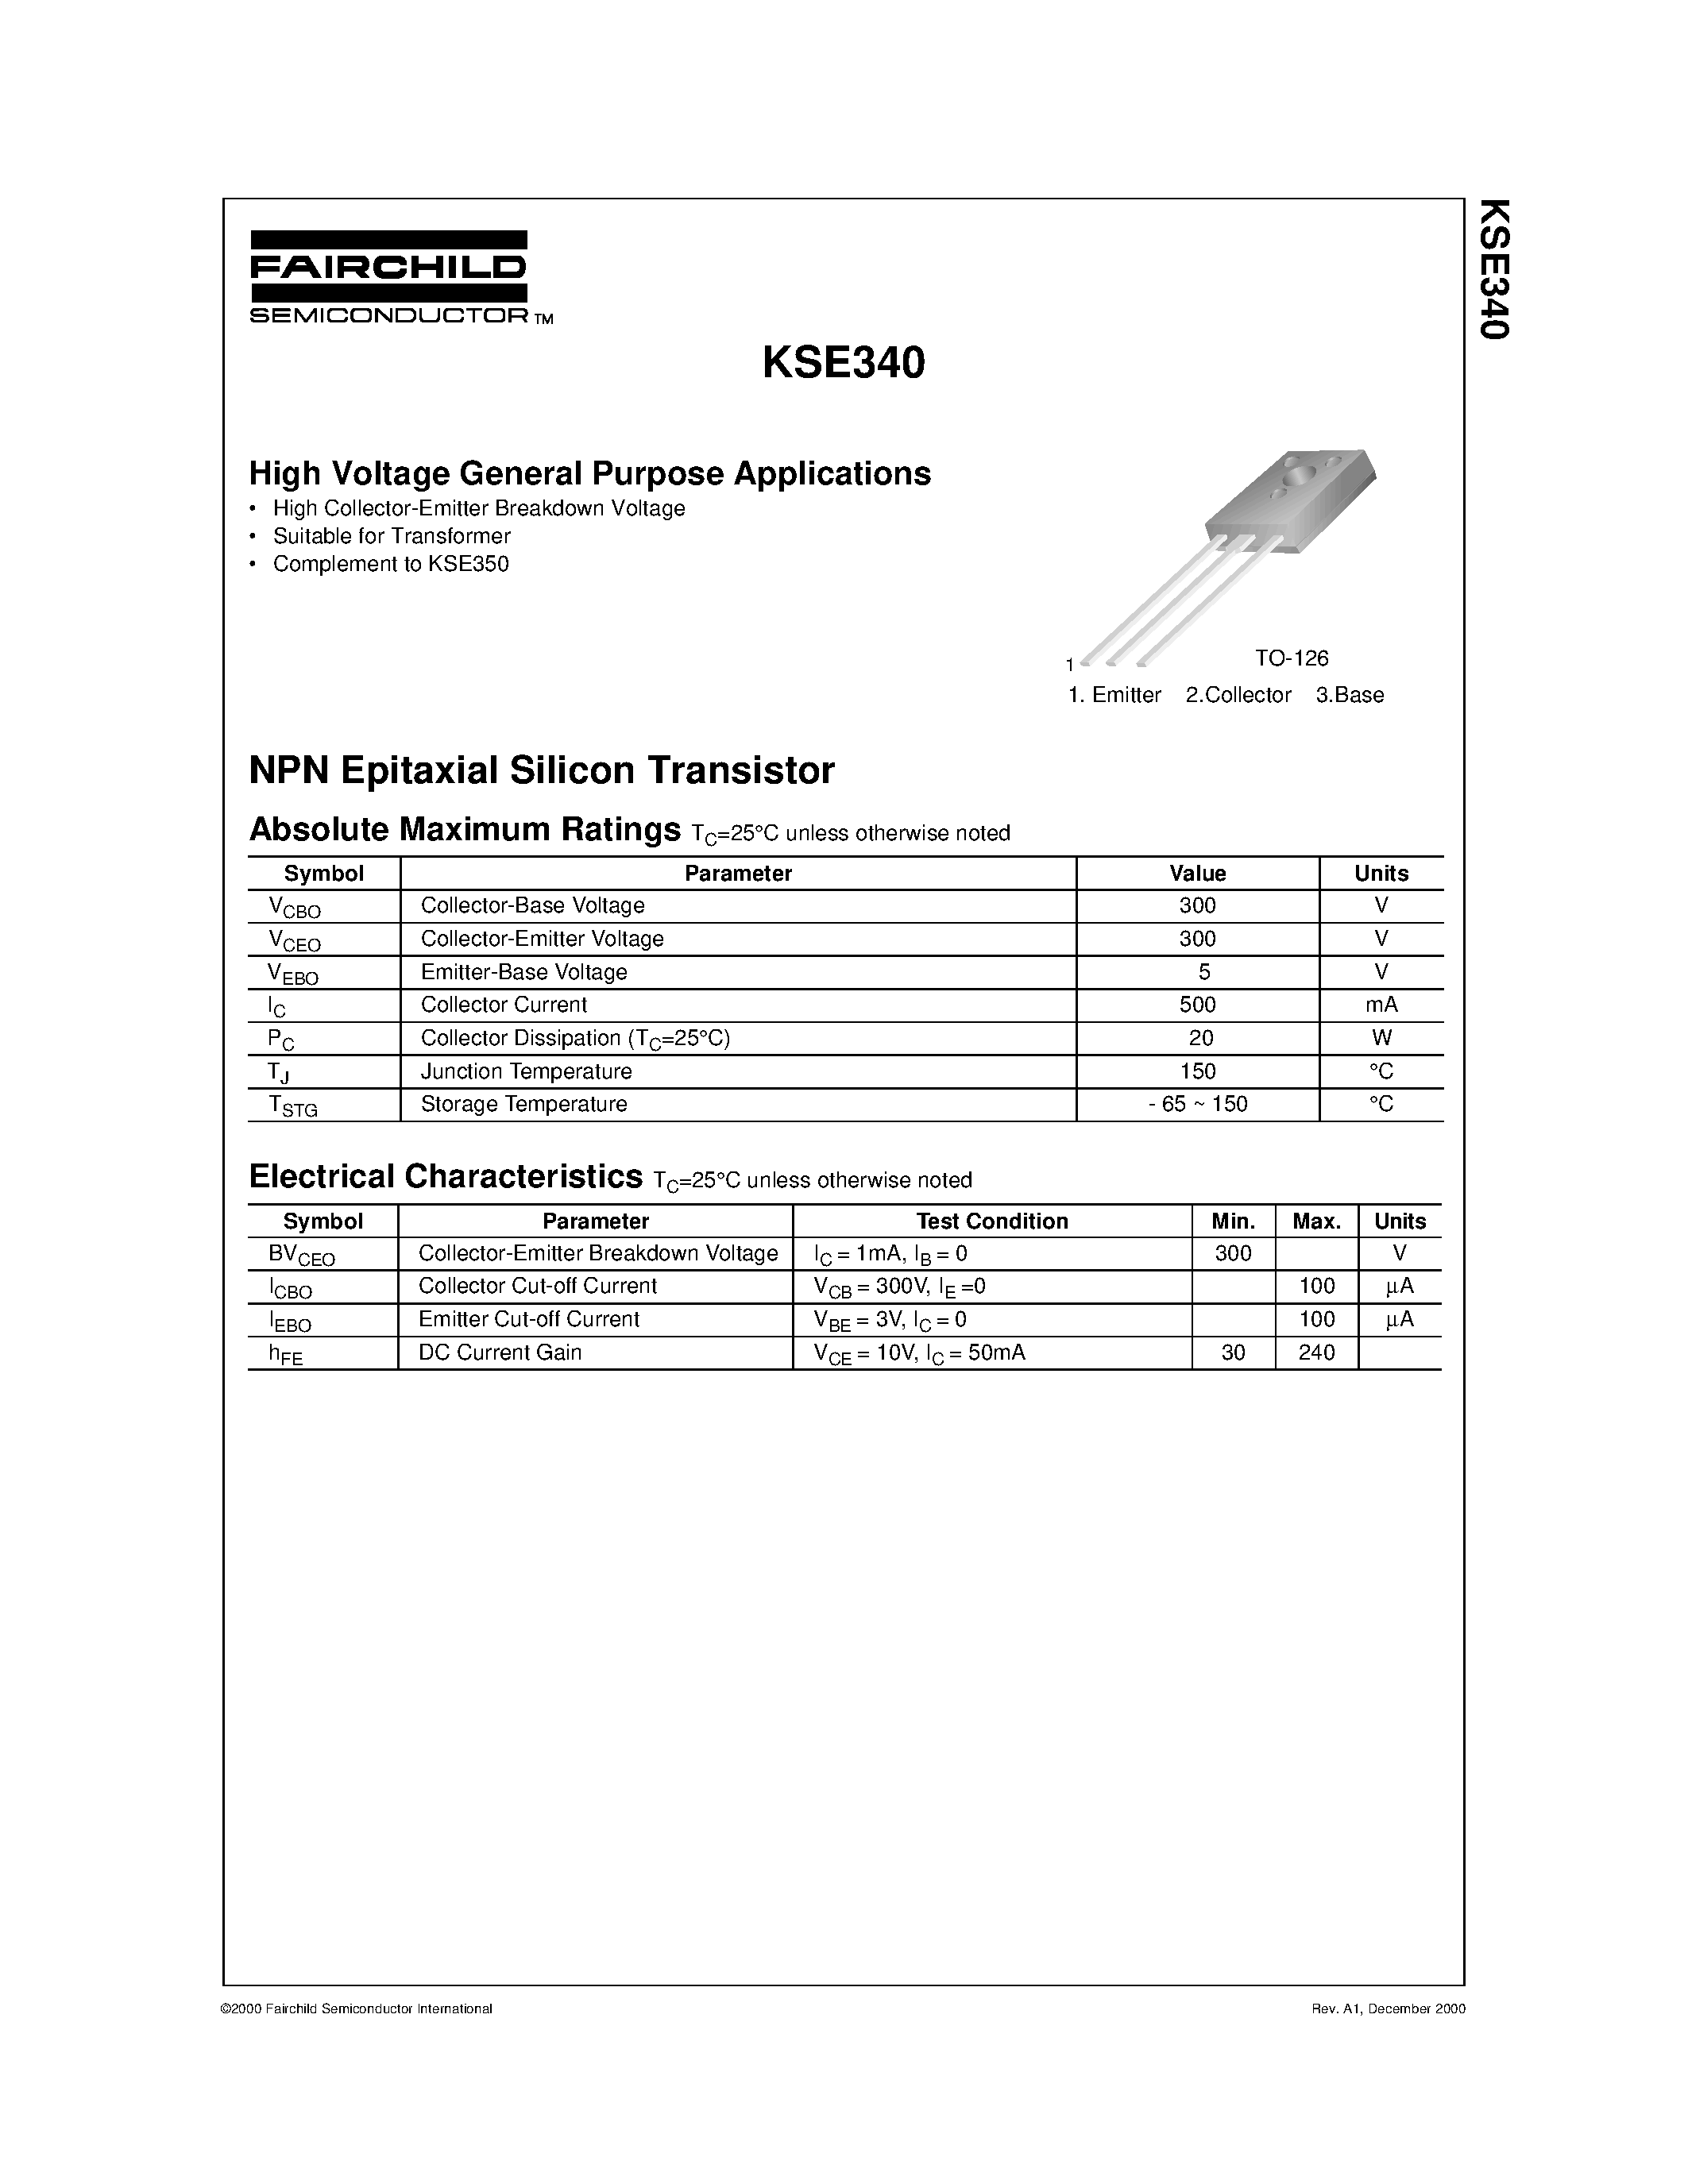 Datasheet KSE340 - High Voltage General Purpose Applications page 1